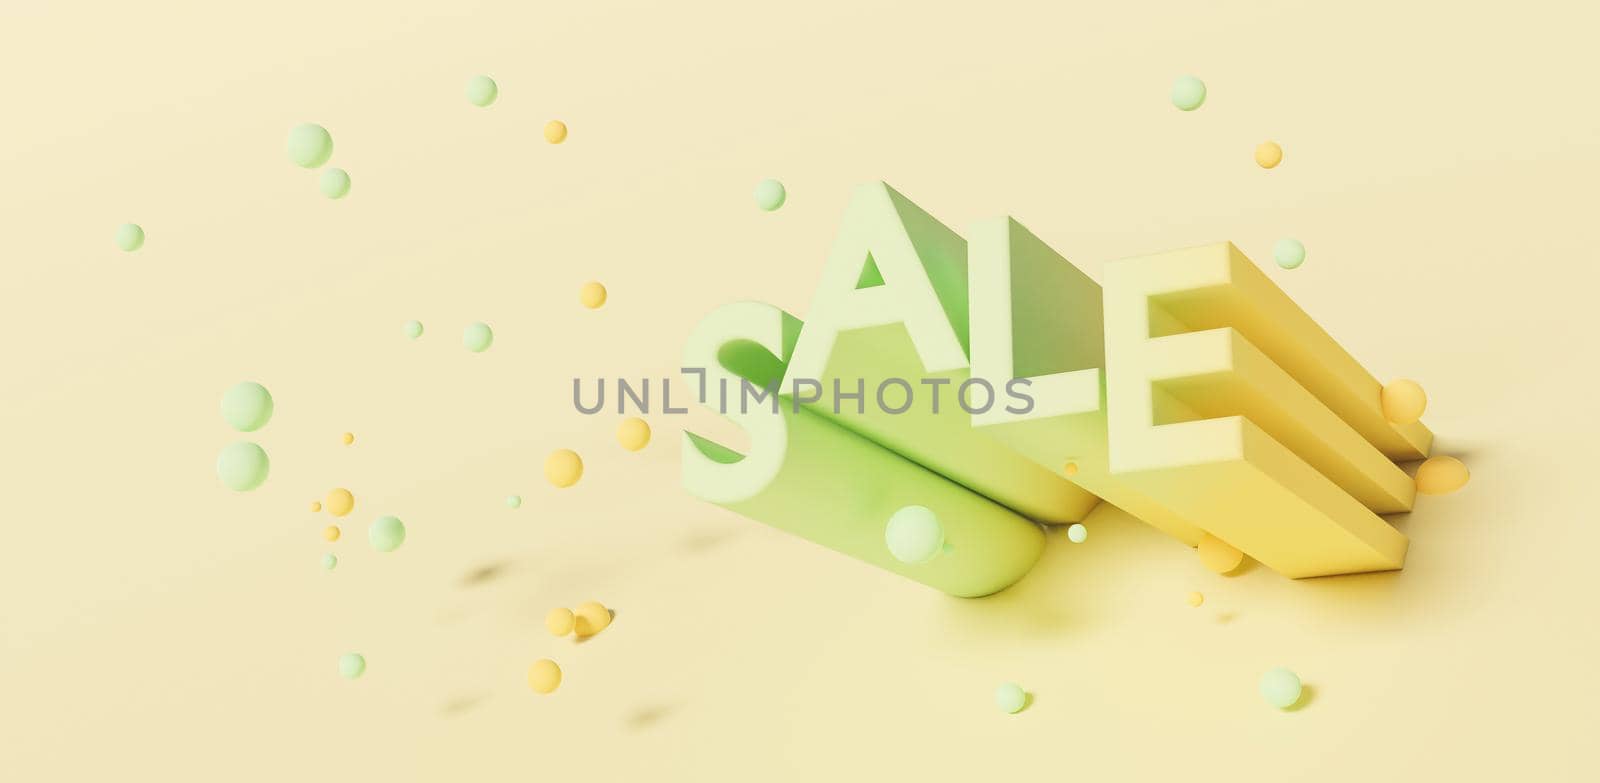 SALE sign with spheres suspended around it with a pastel background. 3d rendering